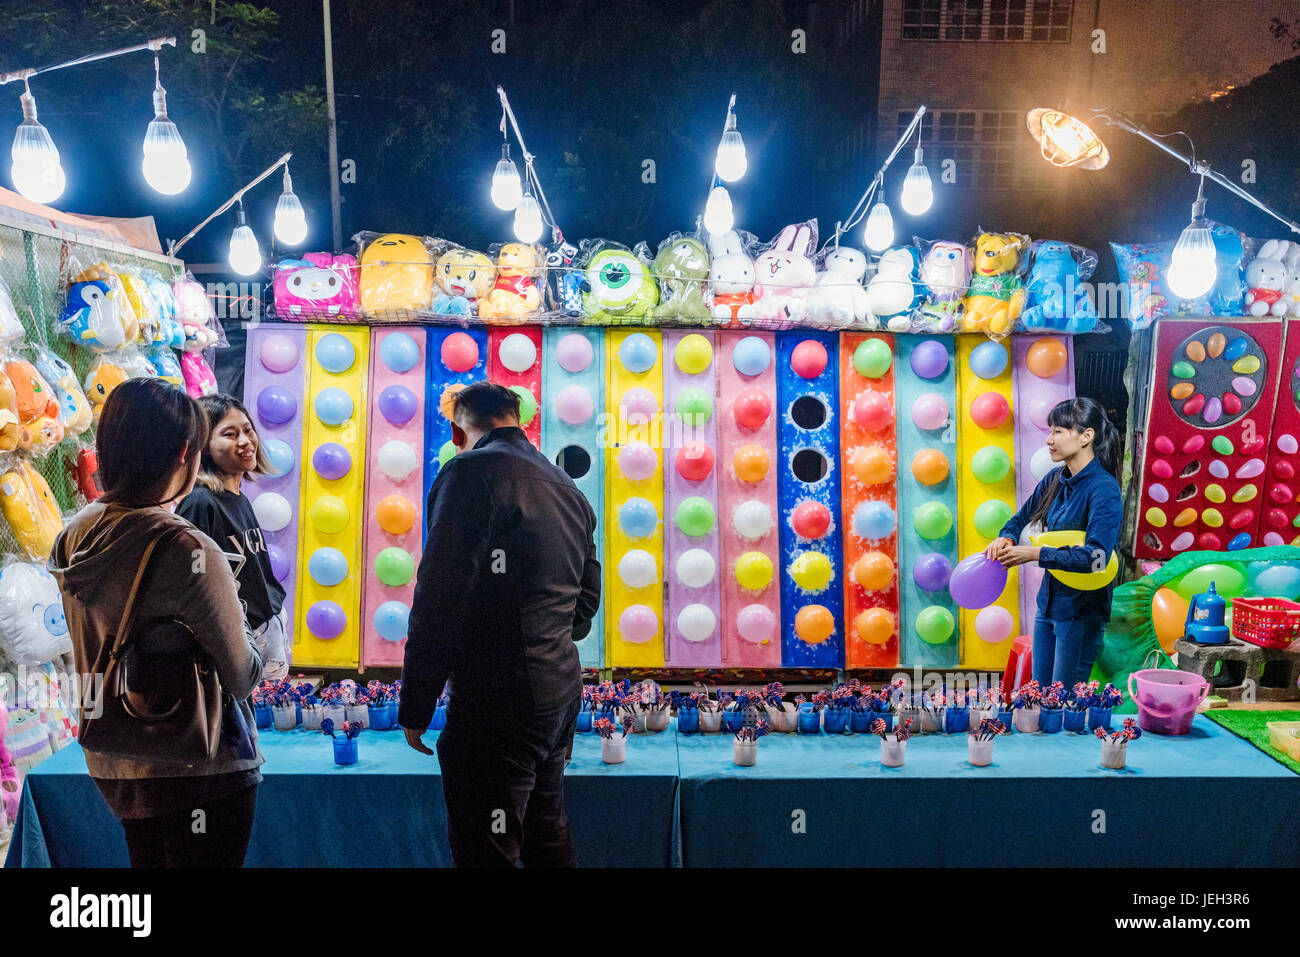 TAIPEI, TAIWAN - MAY 20: This is a game in Shilin night market where people can win soft toys by hitting balloons with darts it is a common game acros Stock Photo